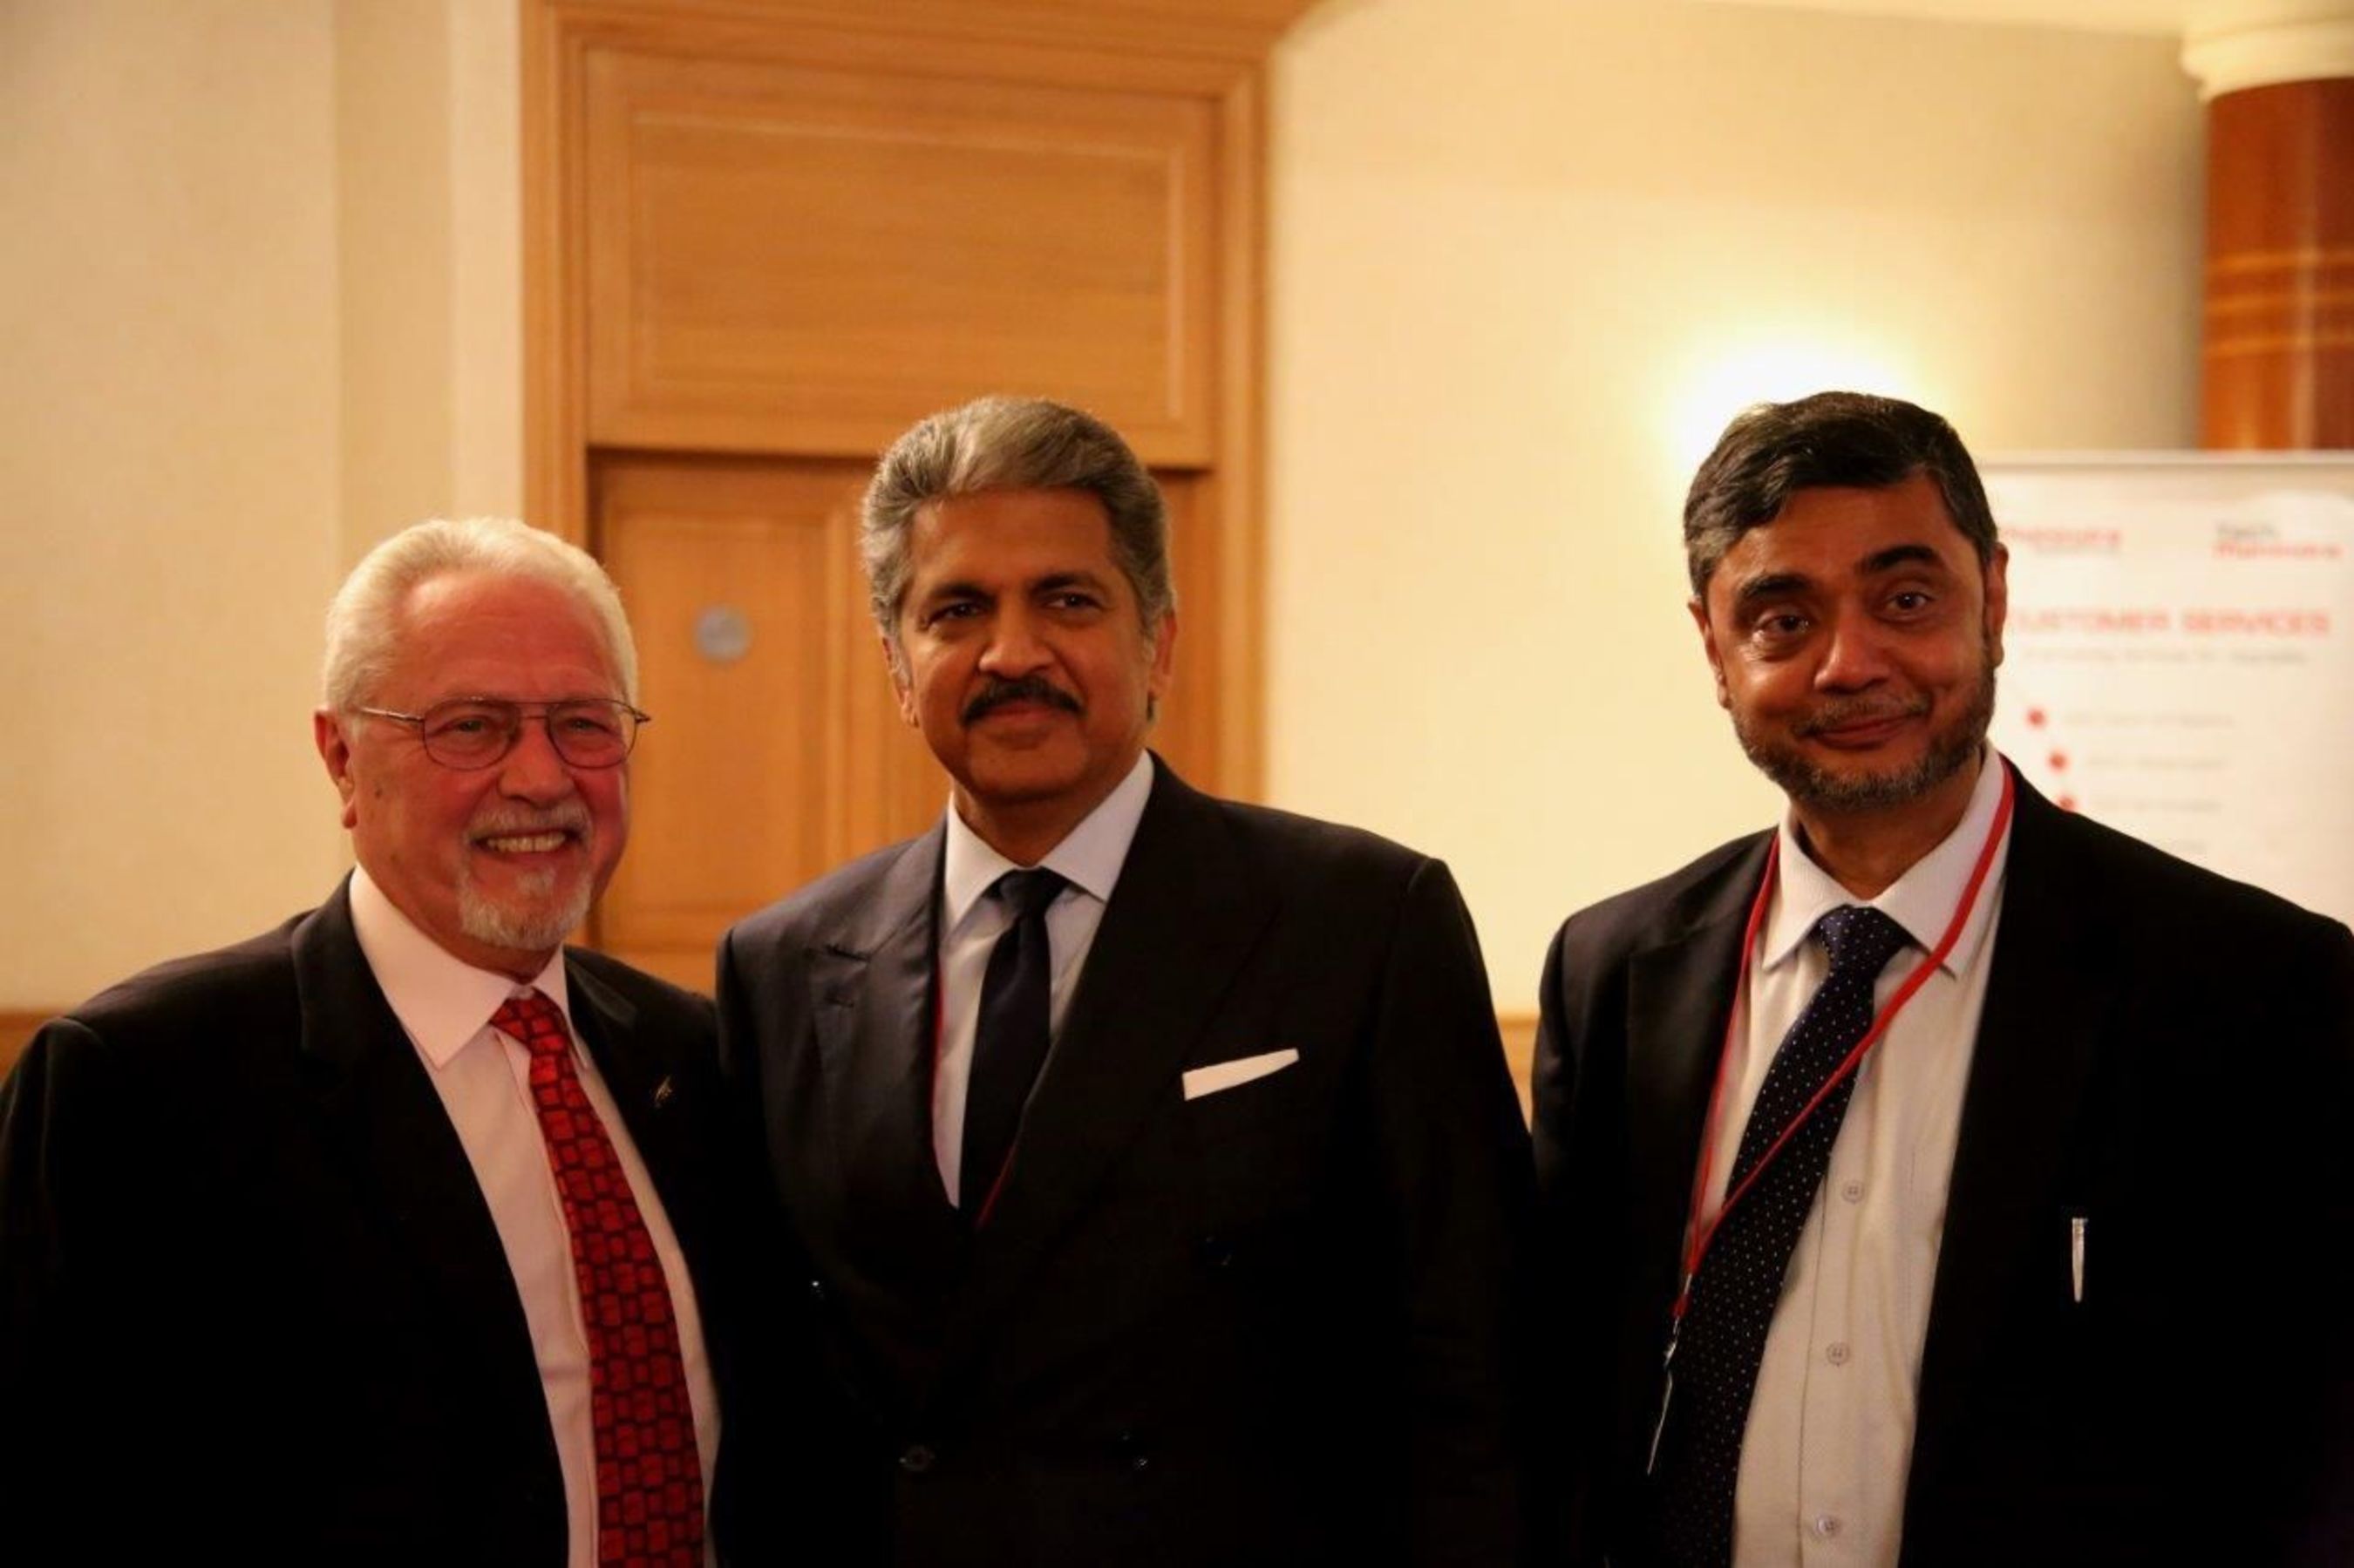 L-R Joesph J. Battaglia, President & CEO, Mr. Anand Mahindra, Chairman & Managing Director, Mahindra Group and Mr. SP Shukla, Member of GEB and Group President Aerospace and Defence making the announcment in Paris. (PRNewsFoto/Mahindra & Mahindra Ltd.)